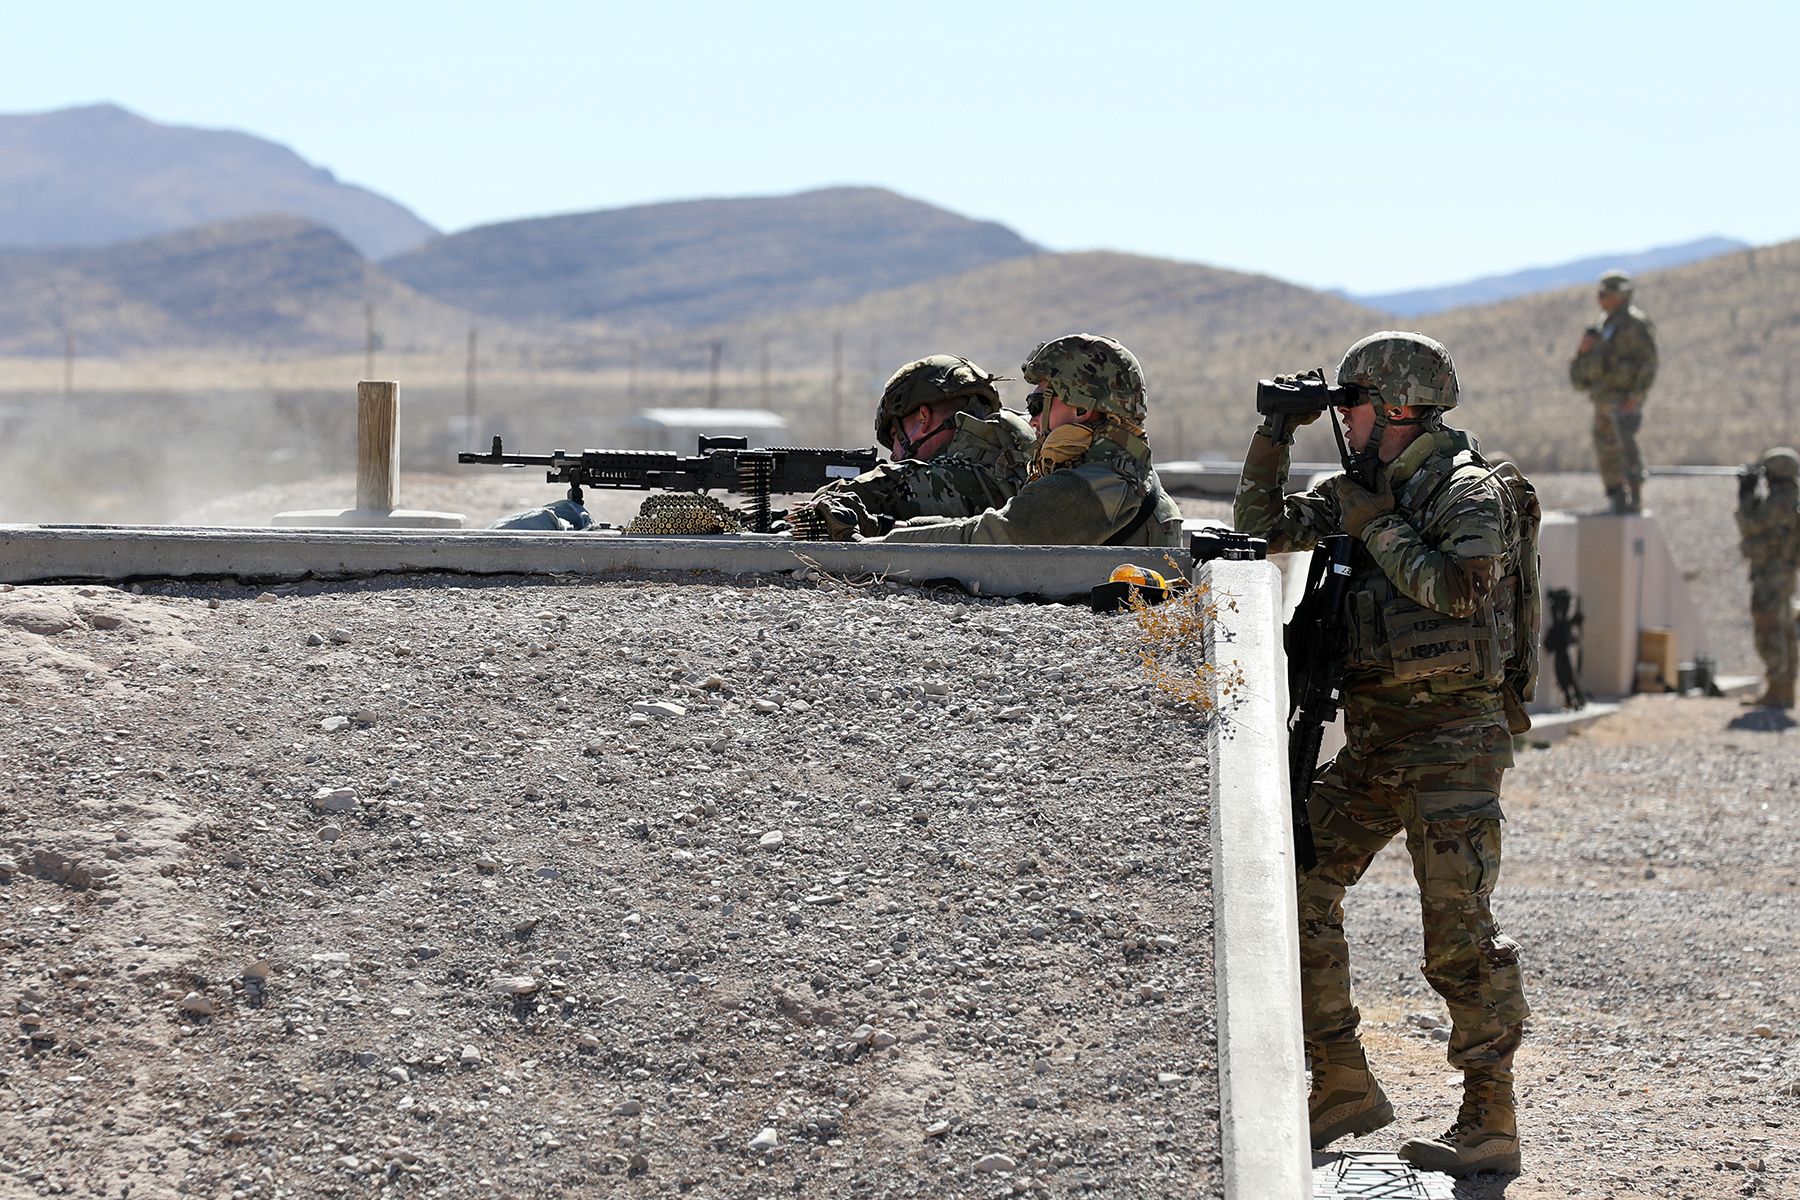 An M240 machine gun team from the 268th Military Police Company, of the Tennessee National Guard fires at targets, while observed by observer coach/trainers assigned to the 3-360th Training Support Battalion, during a range training exercise at Fort Bliss, Texas. The training focused primarily on communications between the tower,